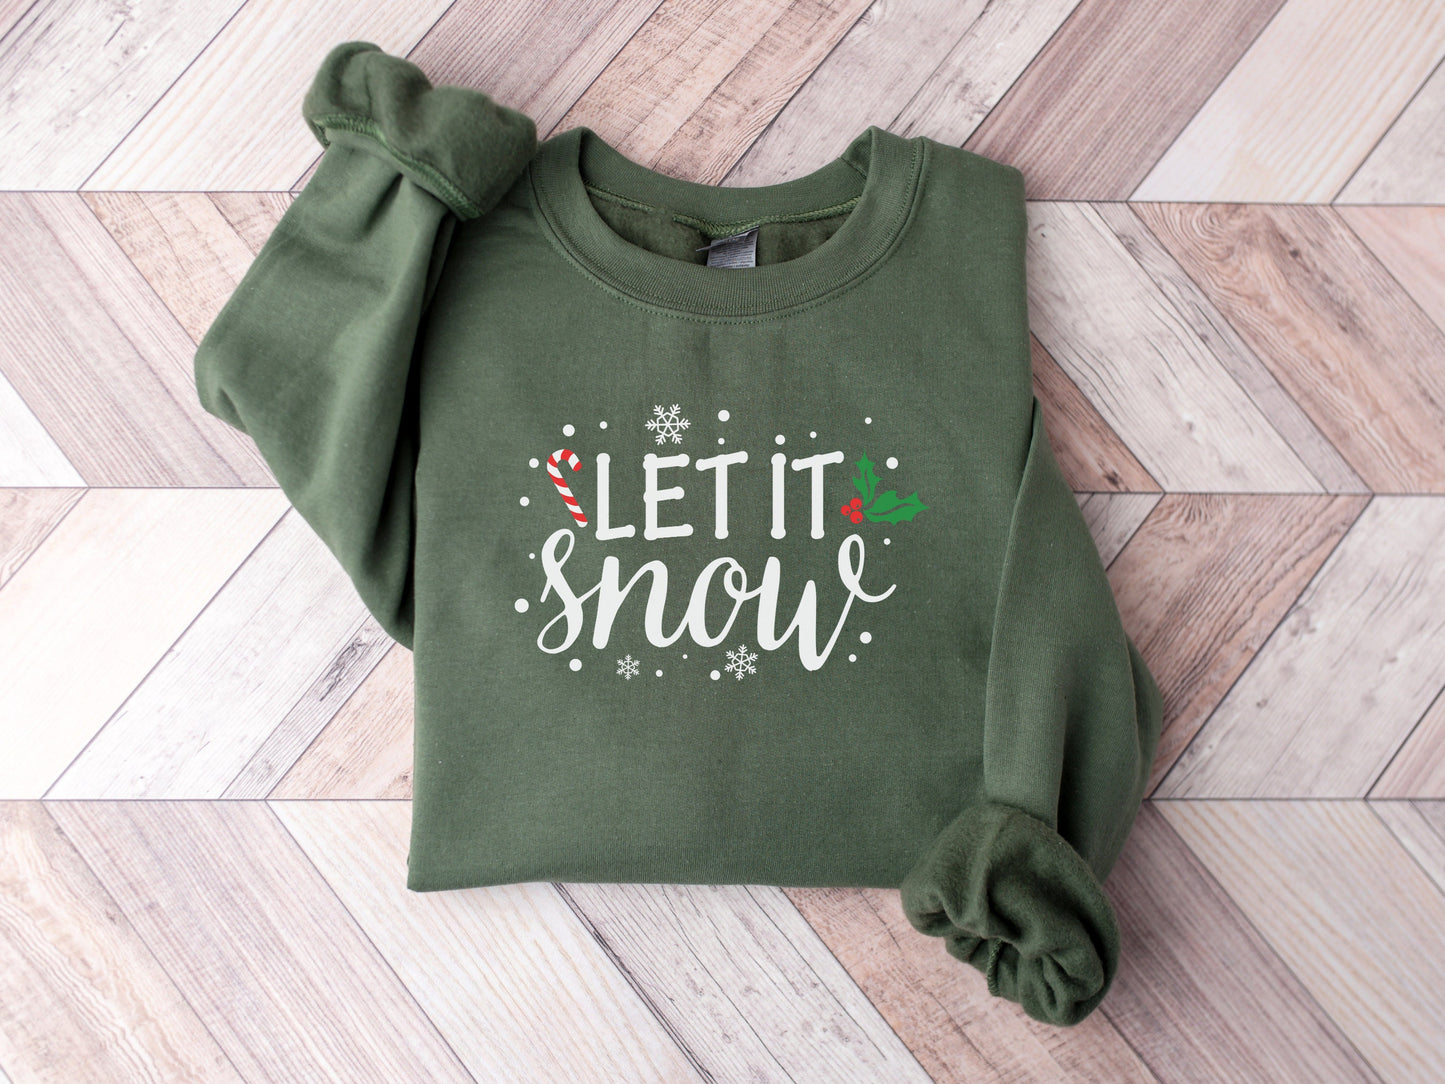 Let It Snow Sweatshirt, Christmas Shirt, Christmas Gift, Let It Snow, Christmas Sweatshirt, Christmas Outfit, Christmas Party Shirt